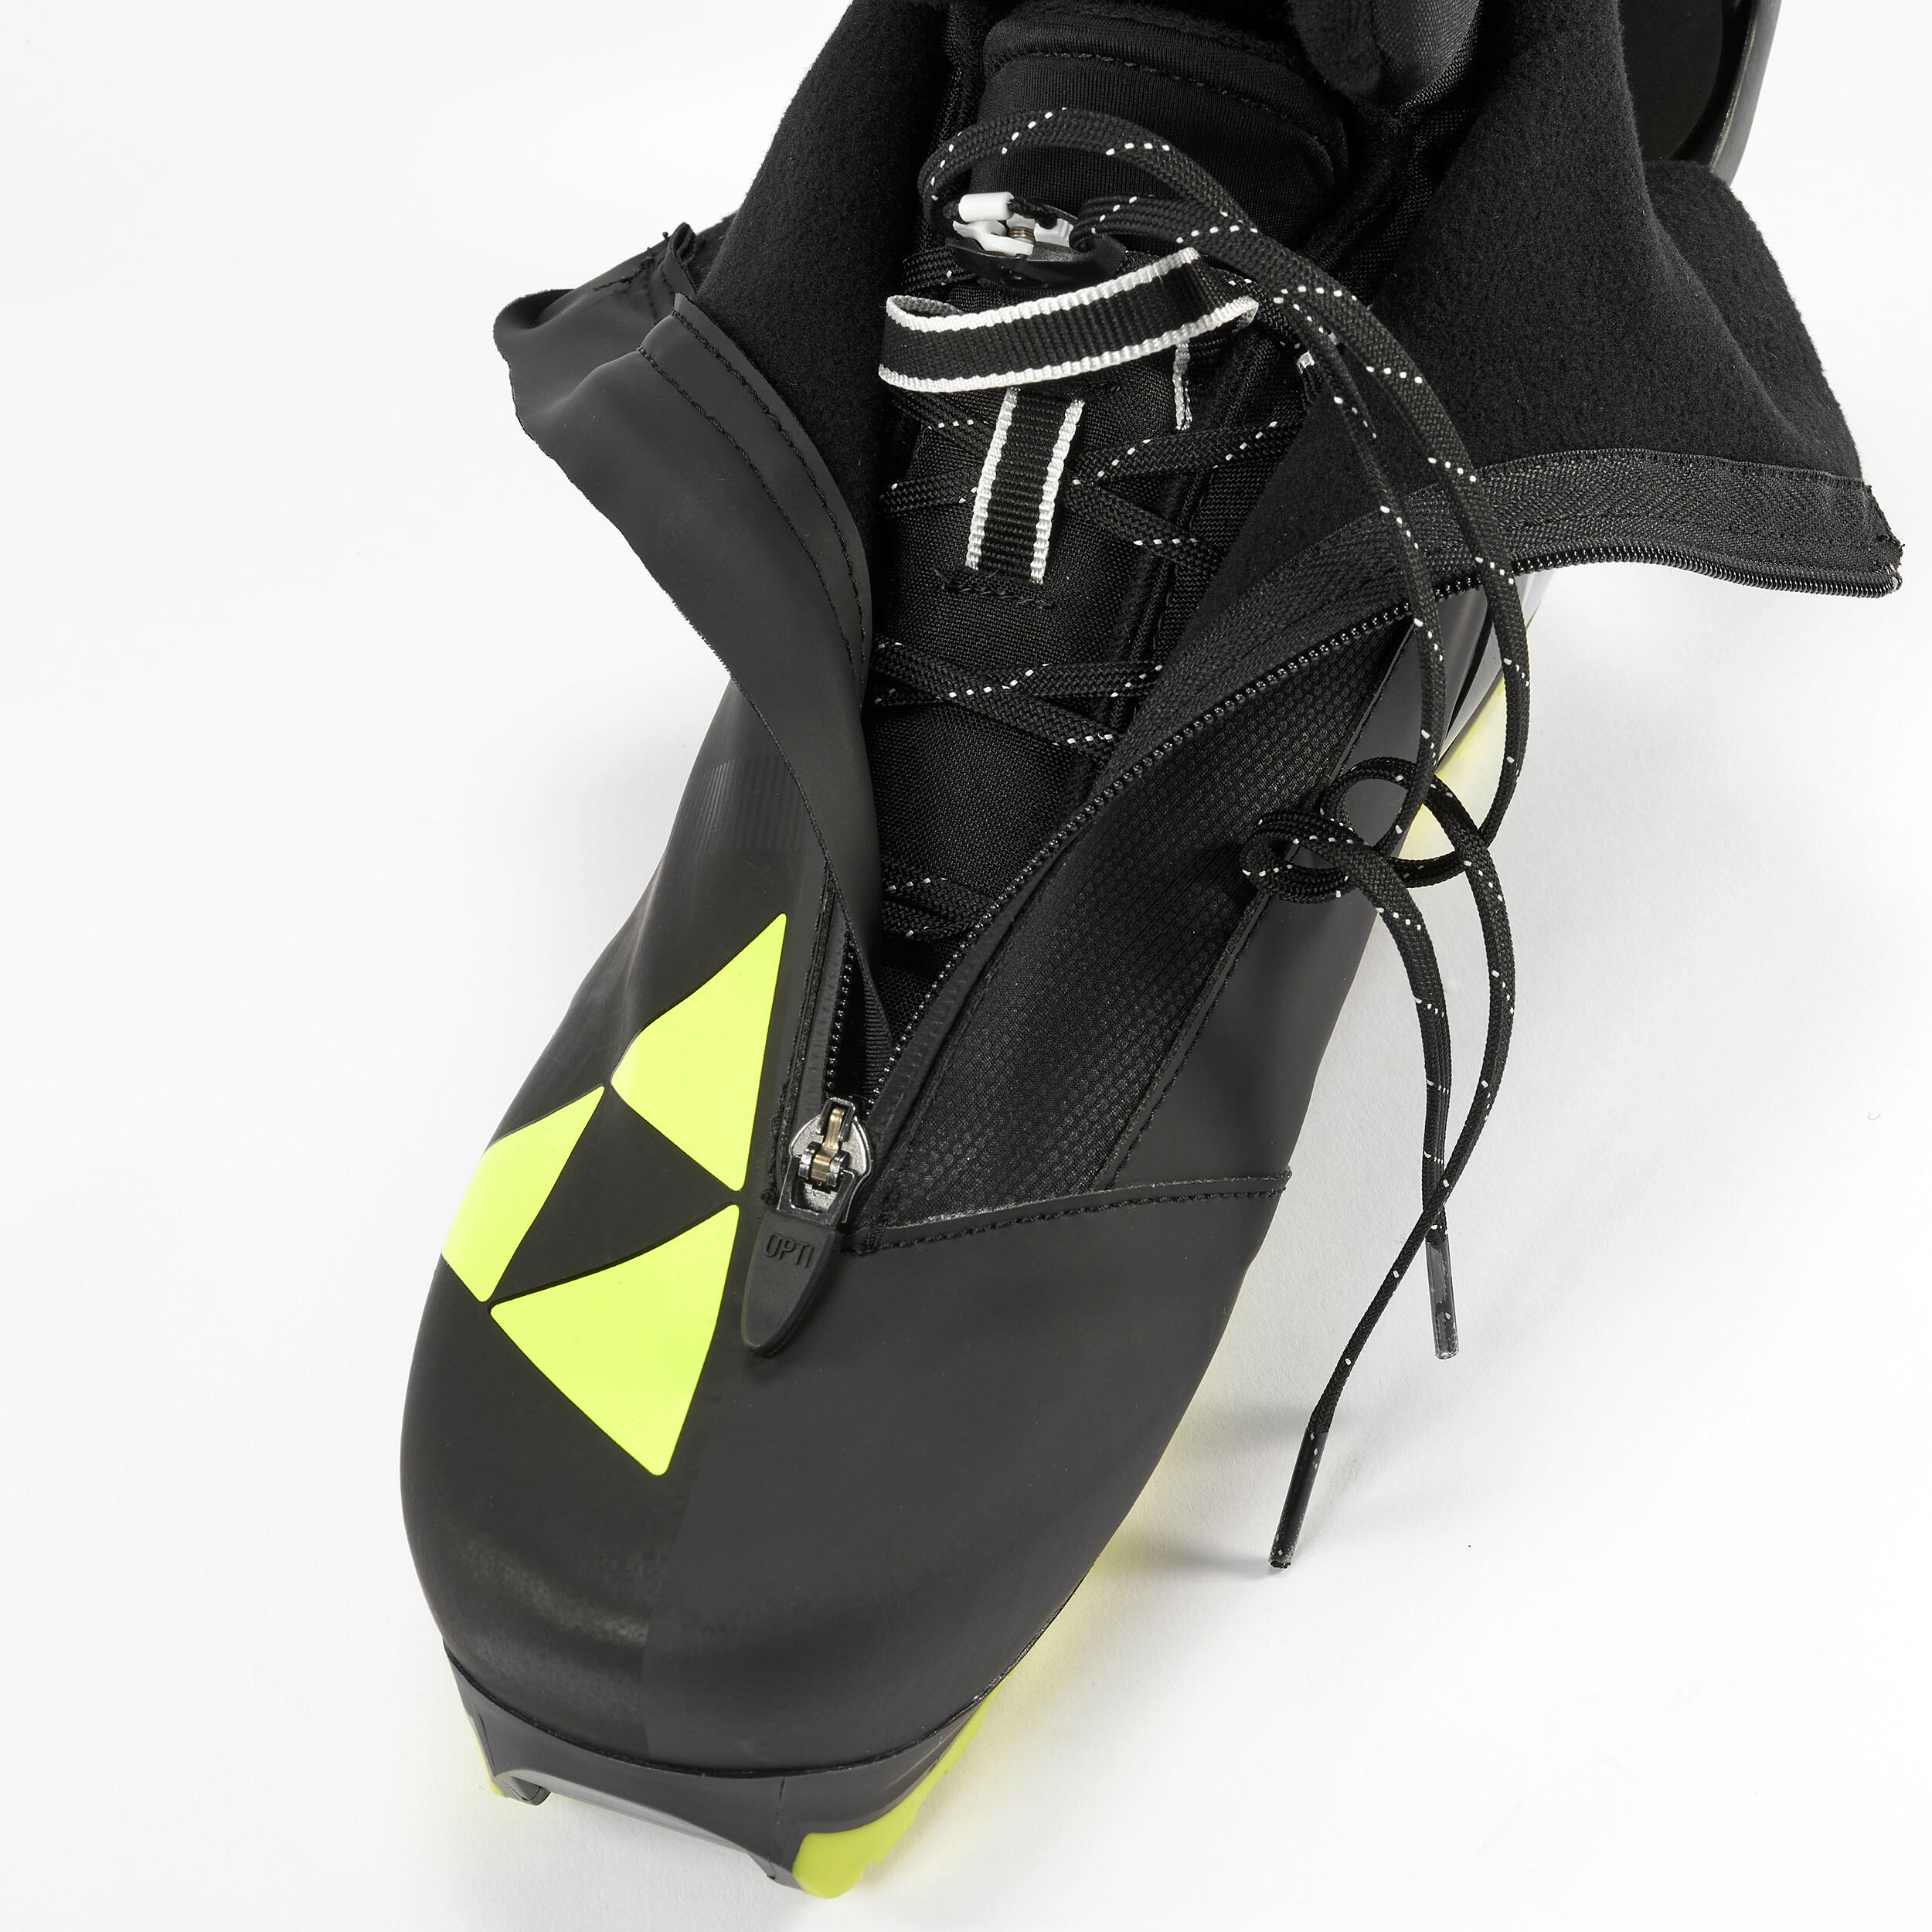 CROSS-COUNTRY SKI SKATING BOOTS - FISCHER CARBON 7/7